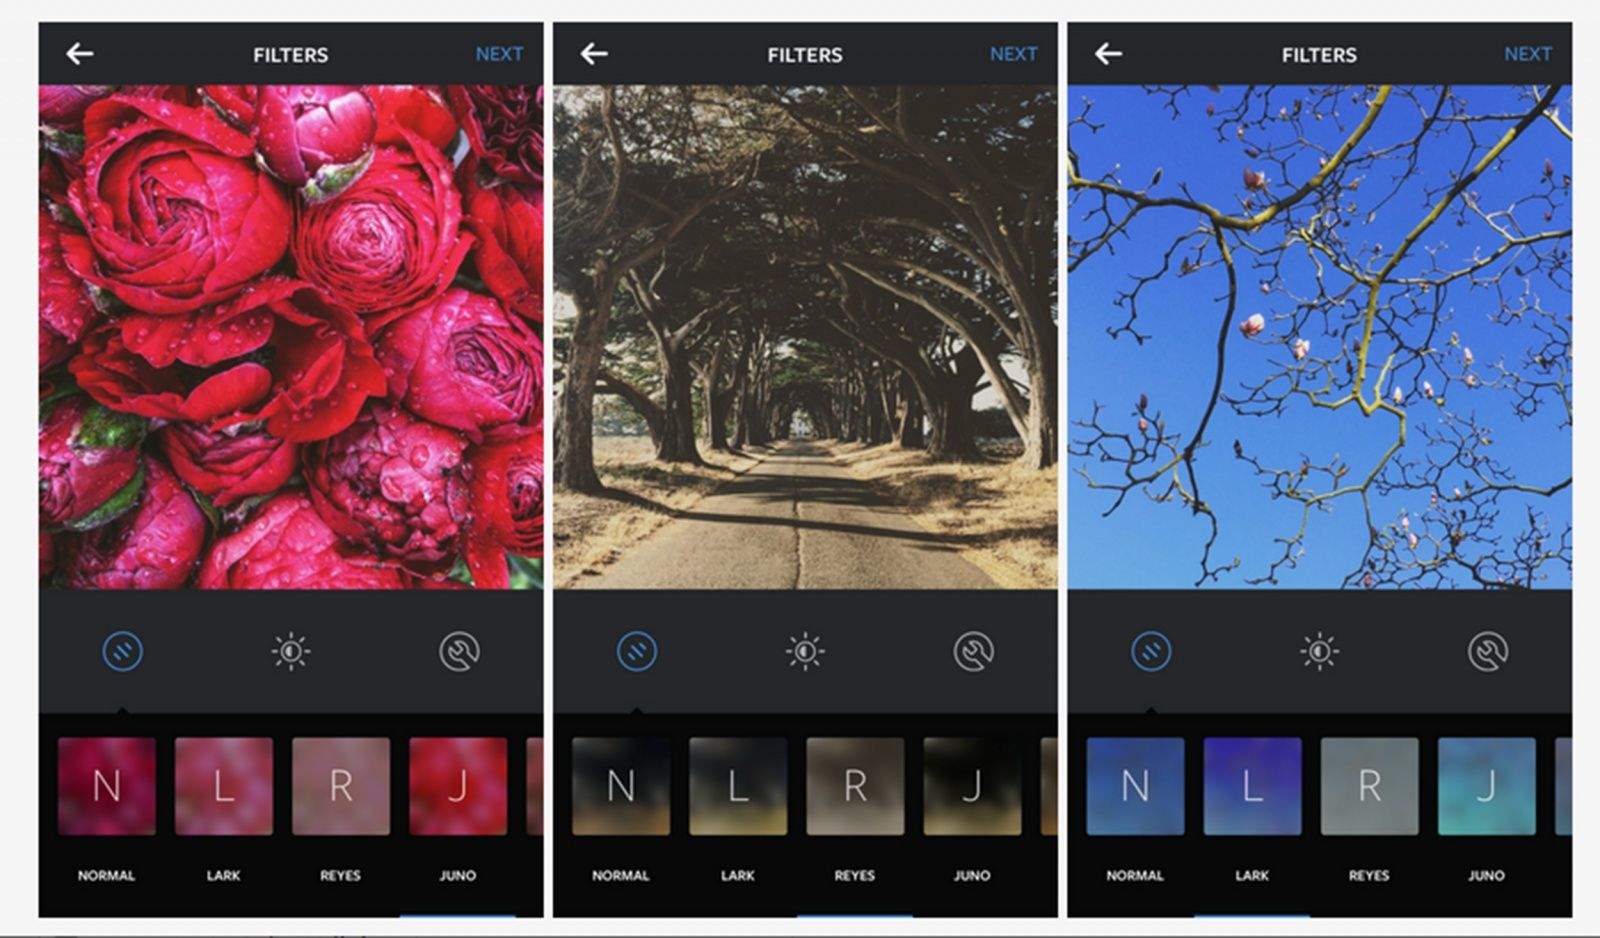 Lark, Reyes and Juno are three new filters for Instagram. Photo: Instagram